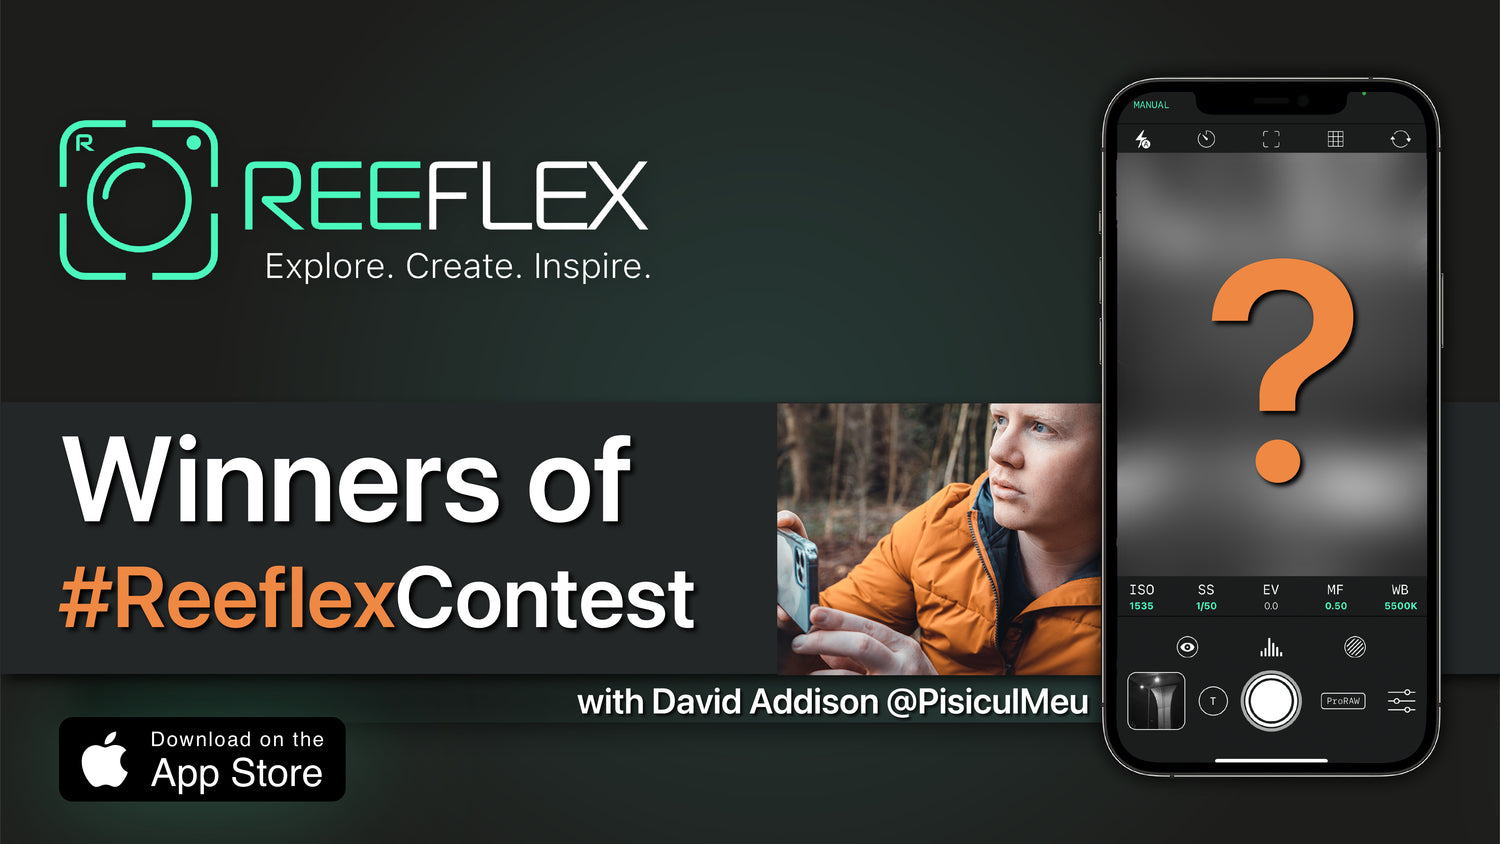 #ReeflexContest - Reviewing your photo submissions and announcing the winners!